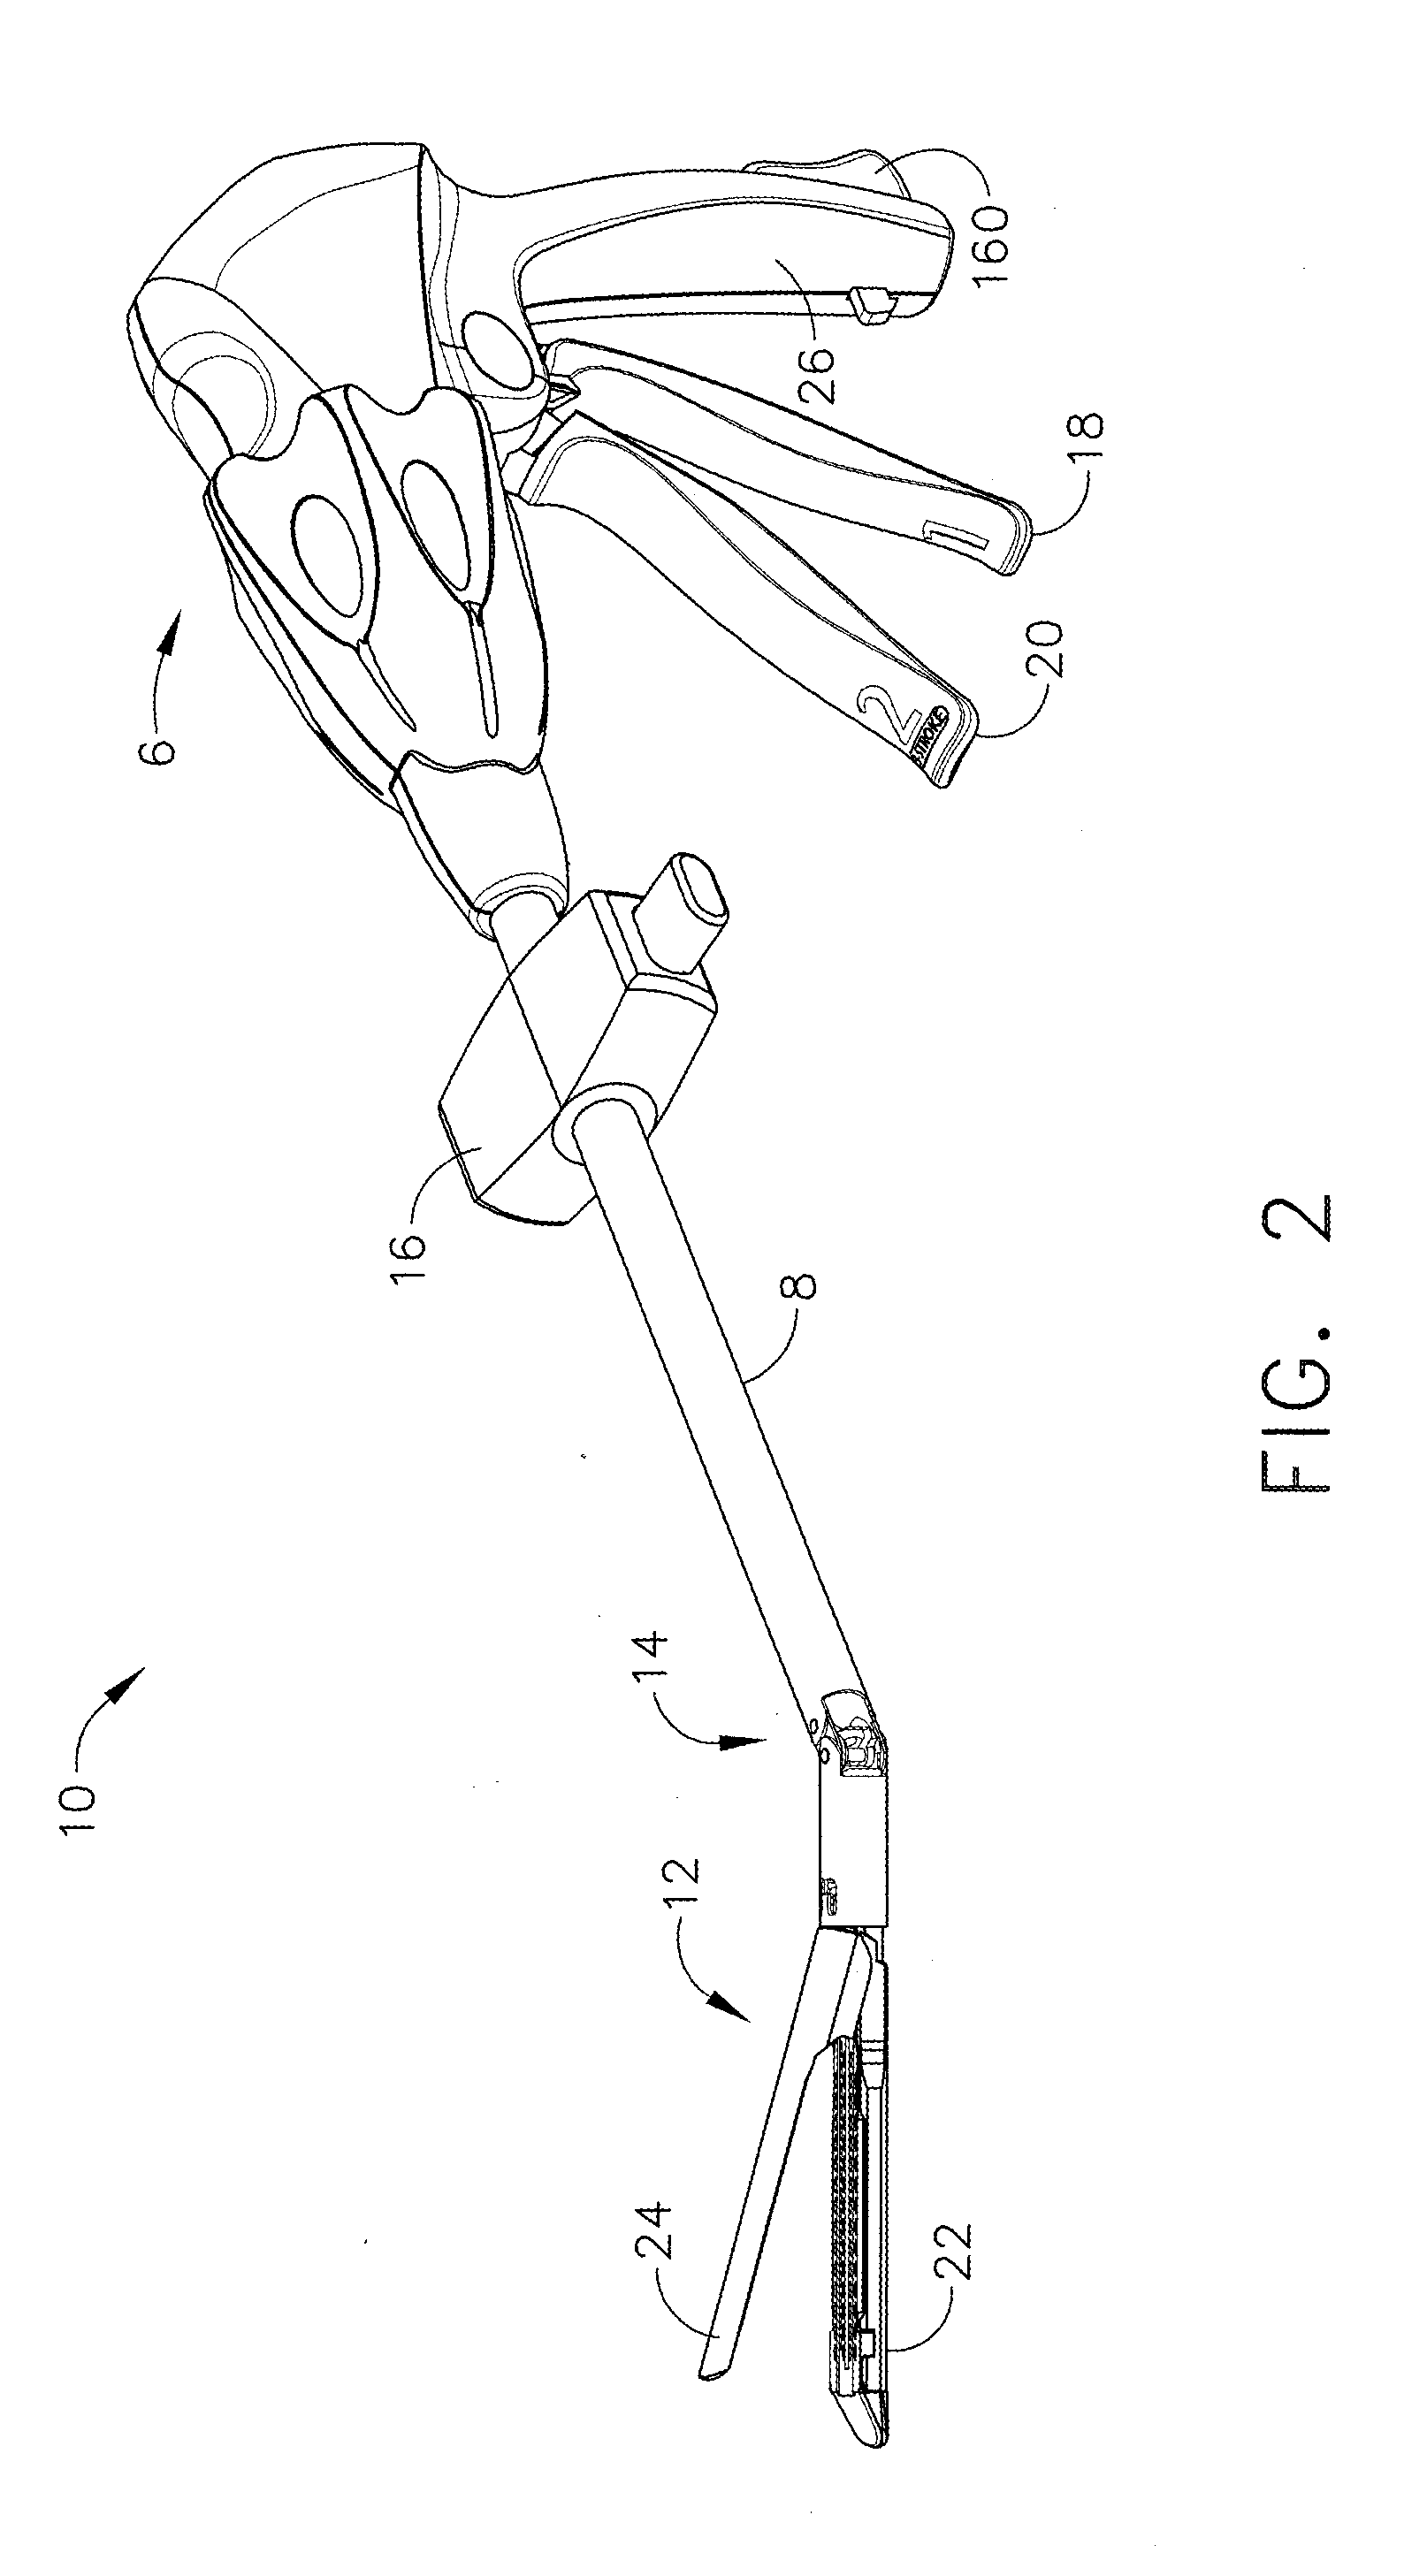 Powered surgical instrument having a transmission system